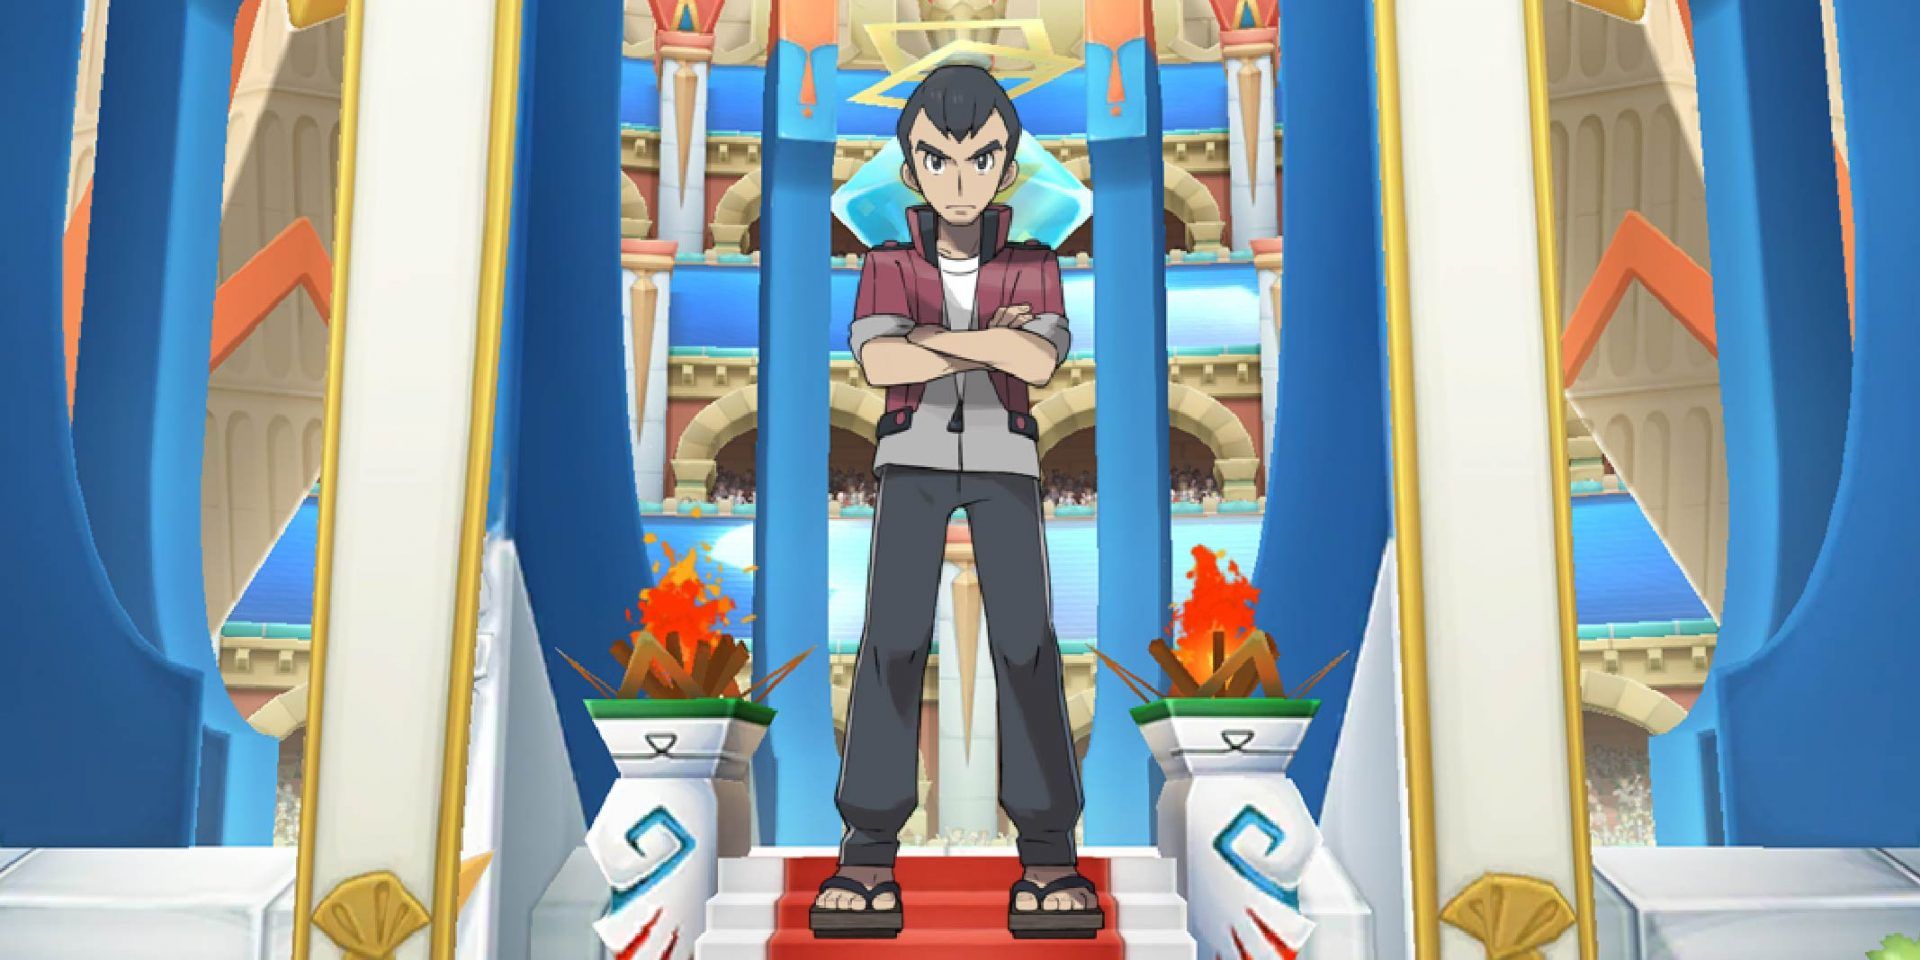 Norman from Pokémon standing against an arena backdrop.